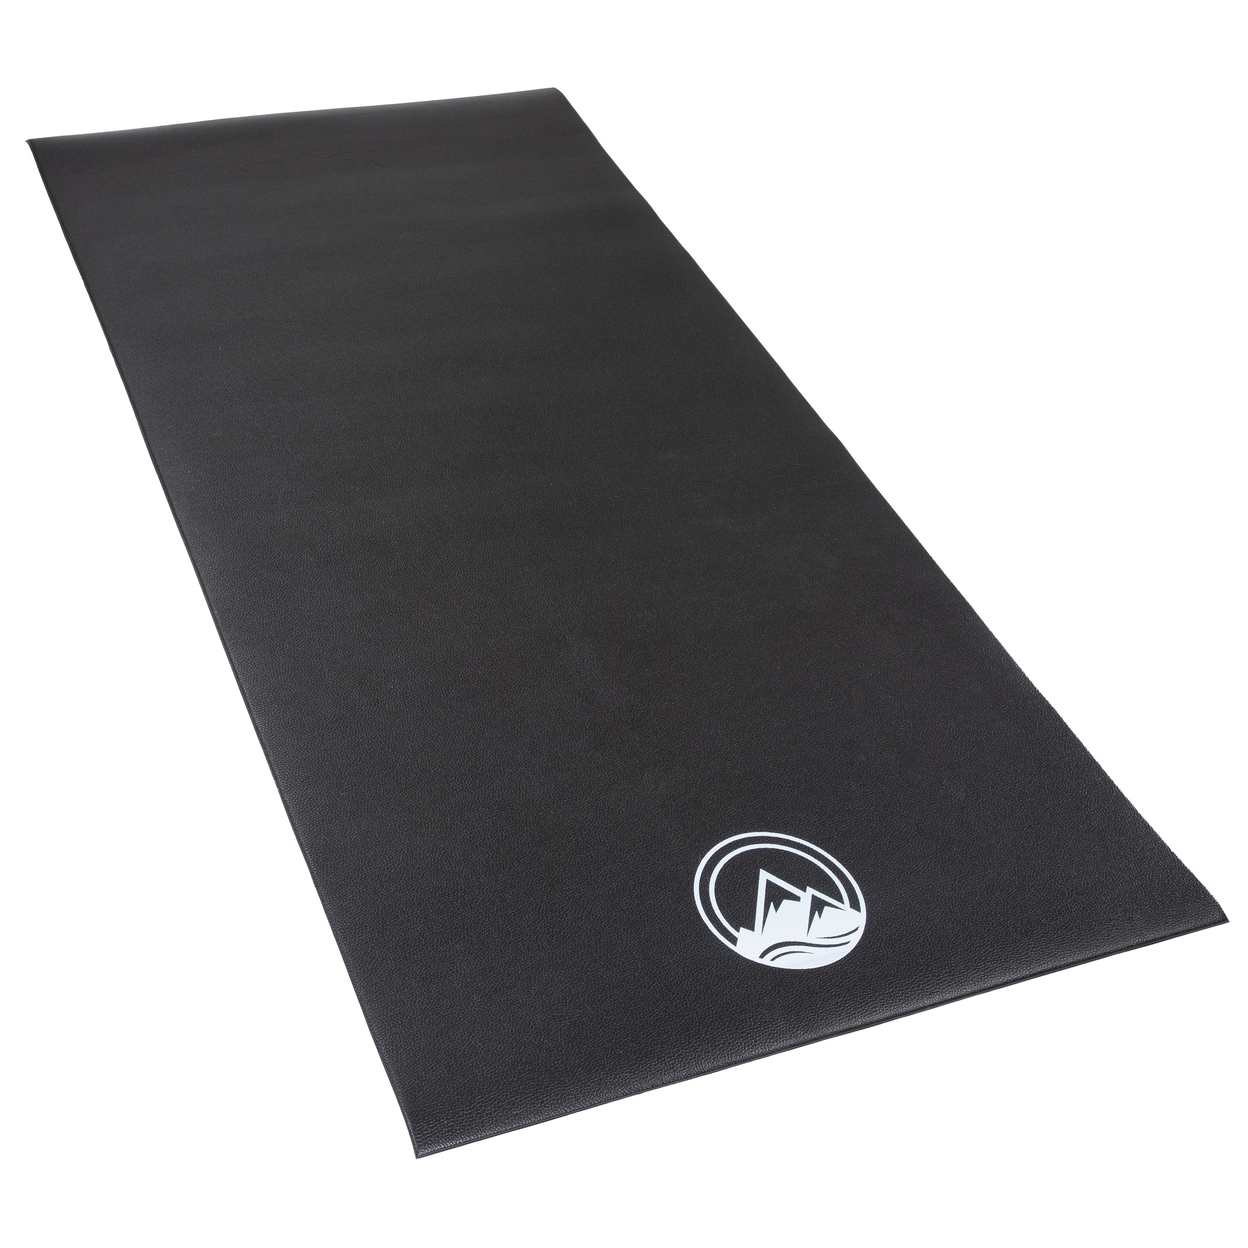 Exercise Bike Mat 30x60in Non-Slip Waterproof Indoor Cycle Or Treadmill Pad